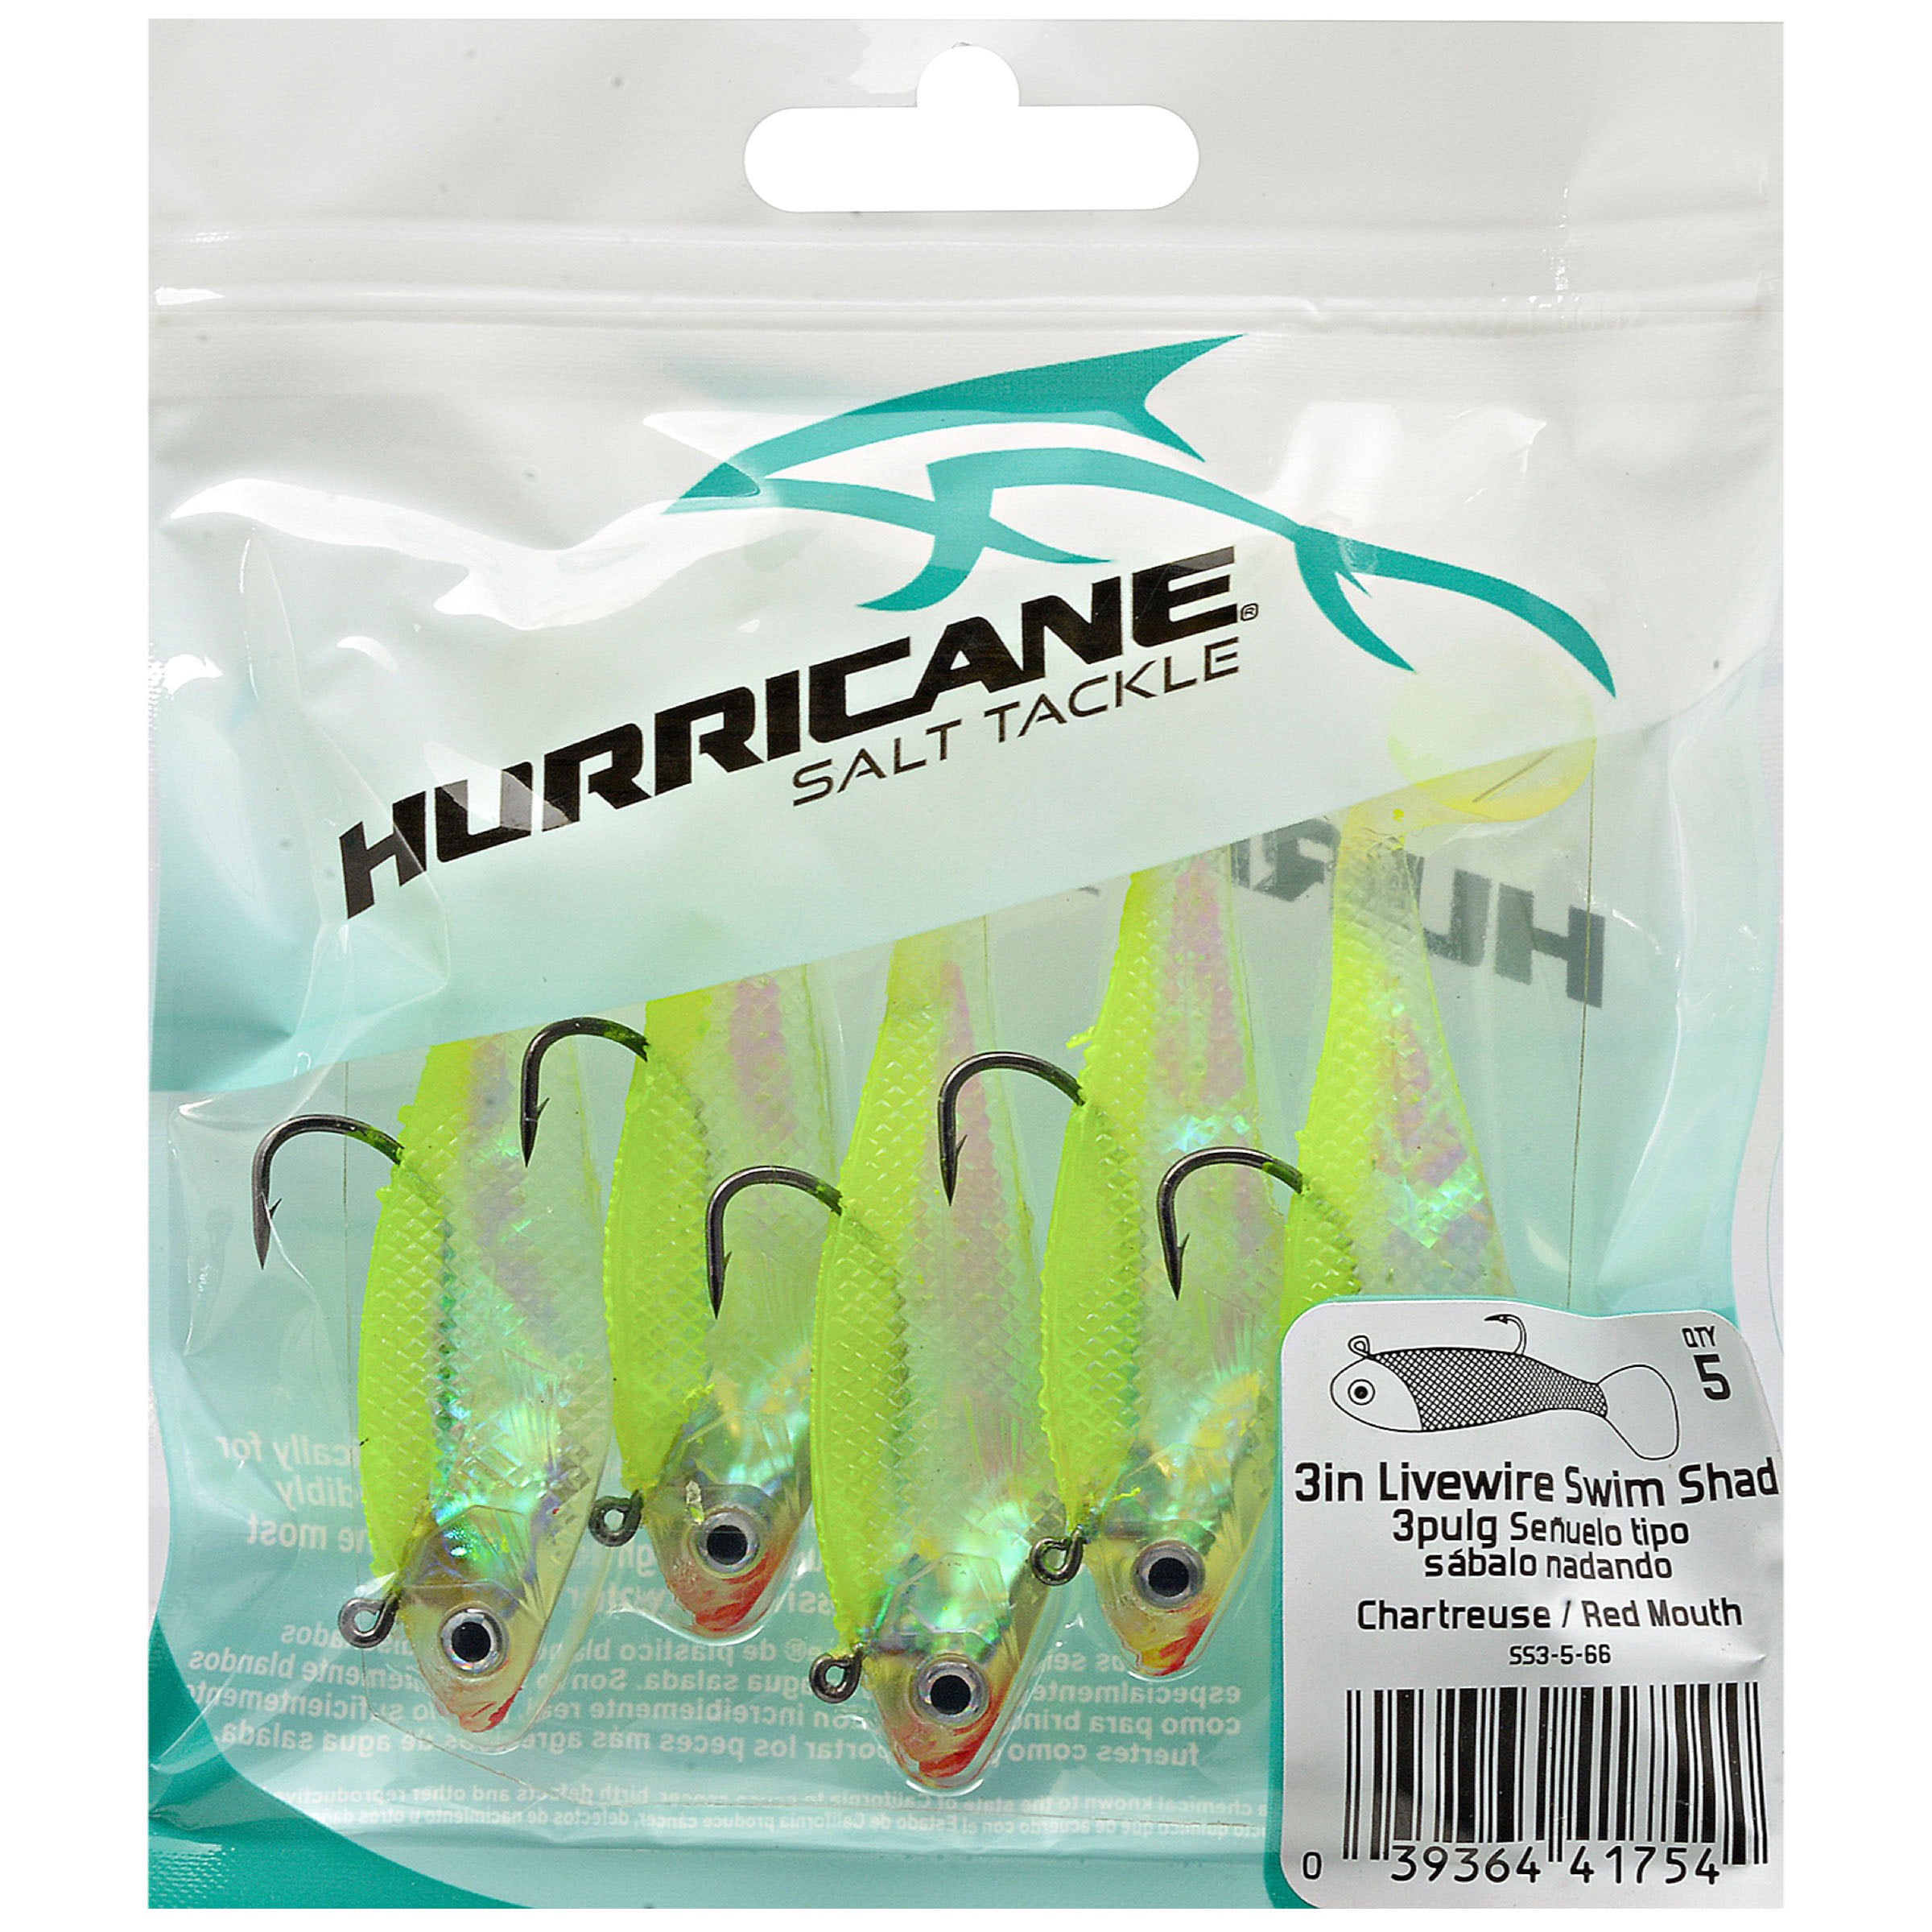 Hurricane Livewire Swim Shad 3 In. Chartreuse/Red Mouth-Chartreuse Tail,  SS3-5-66, Hard Baits